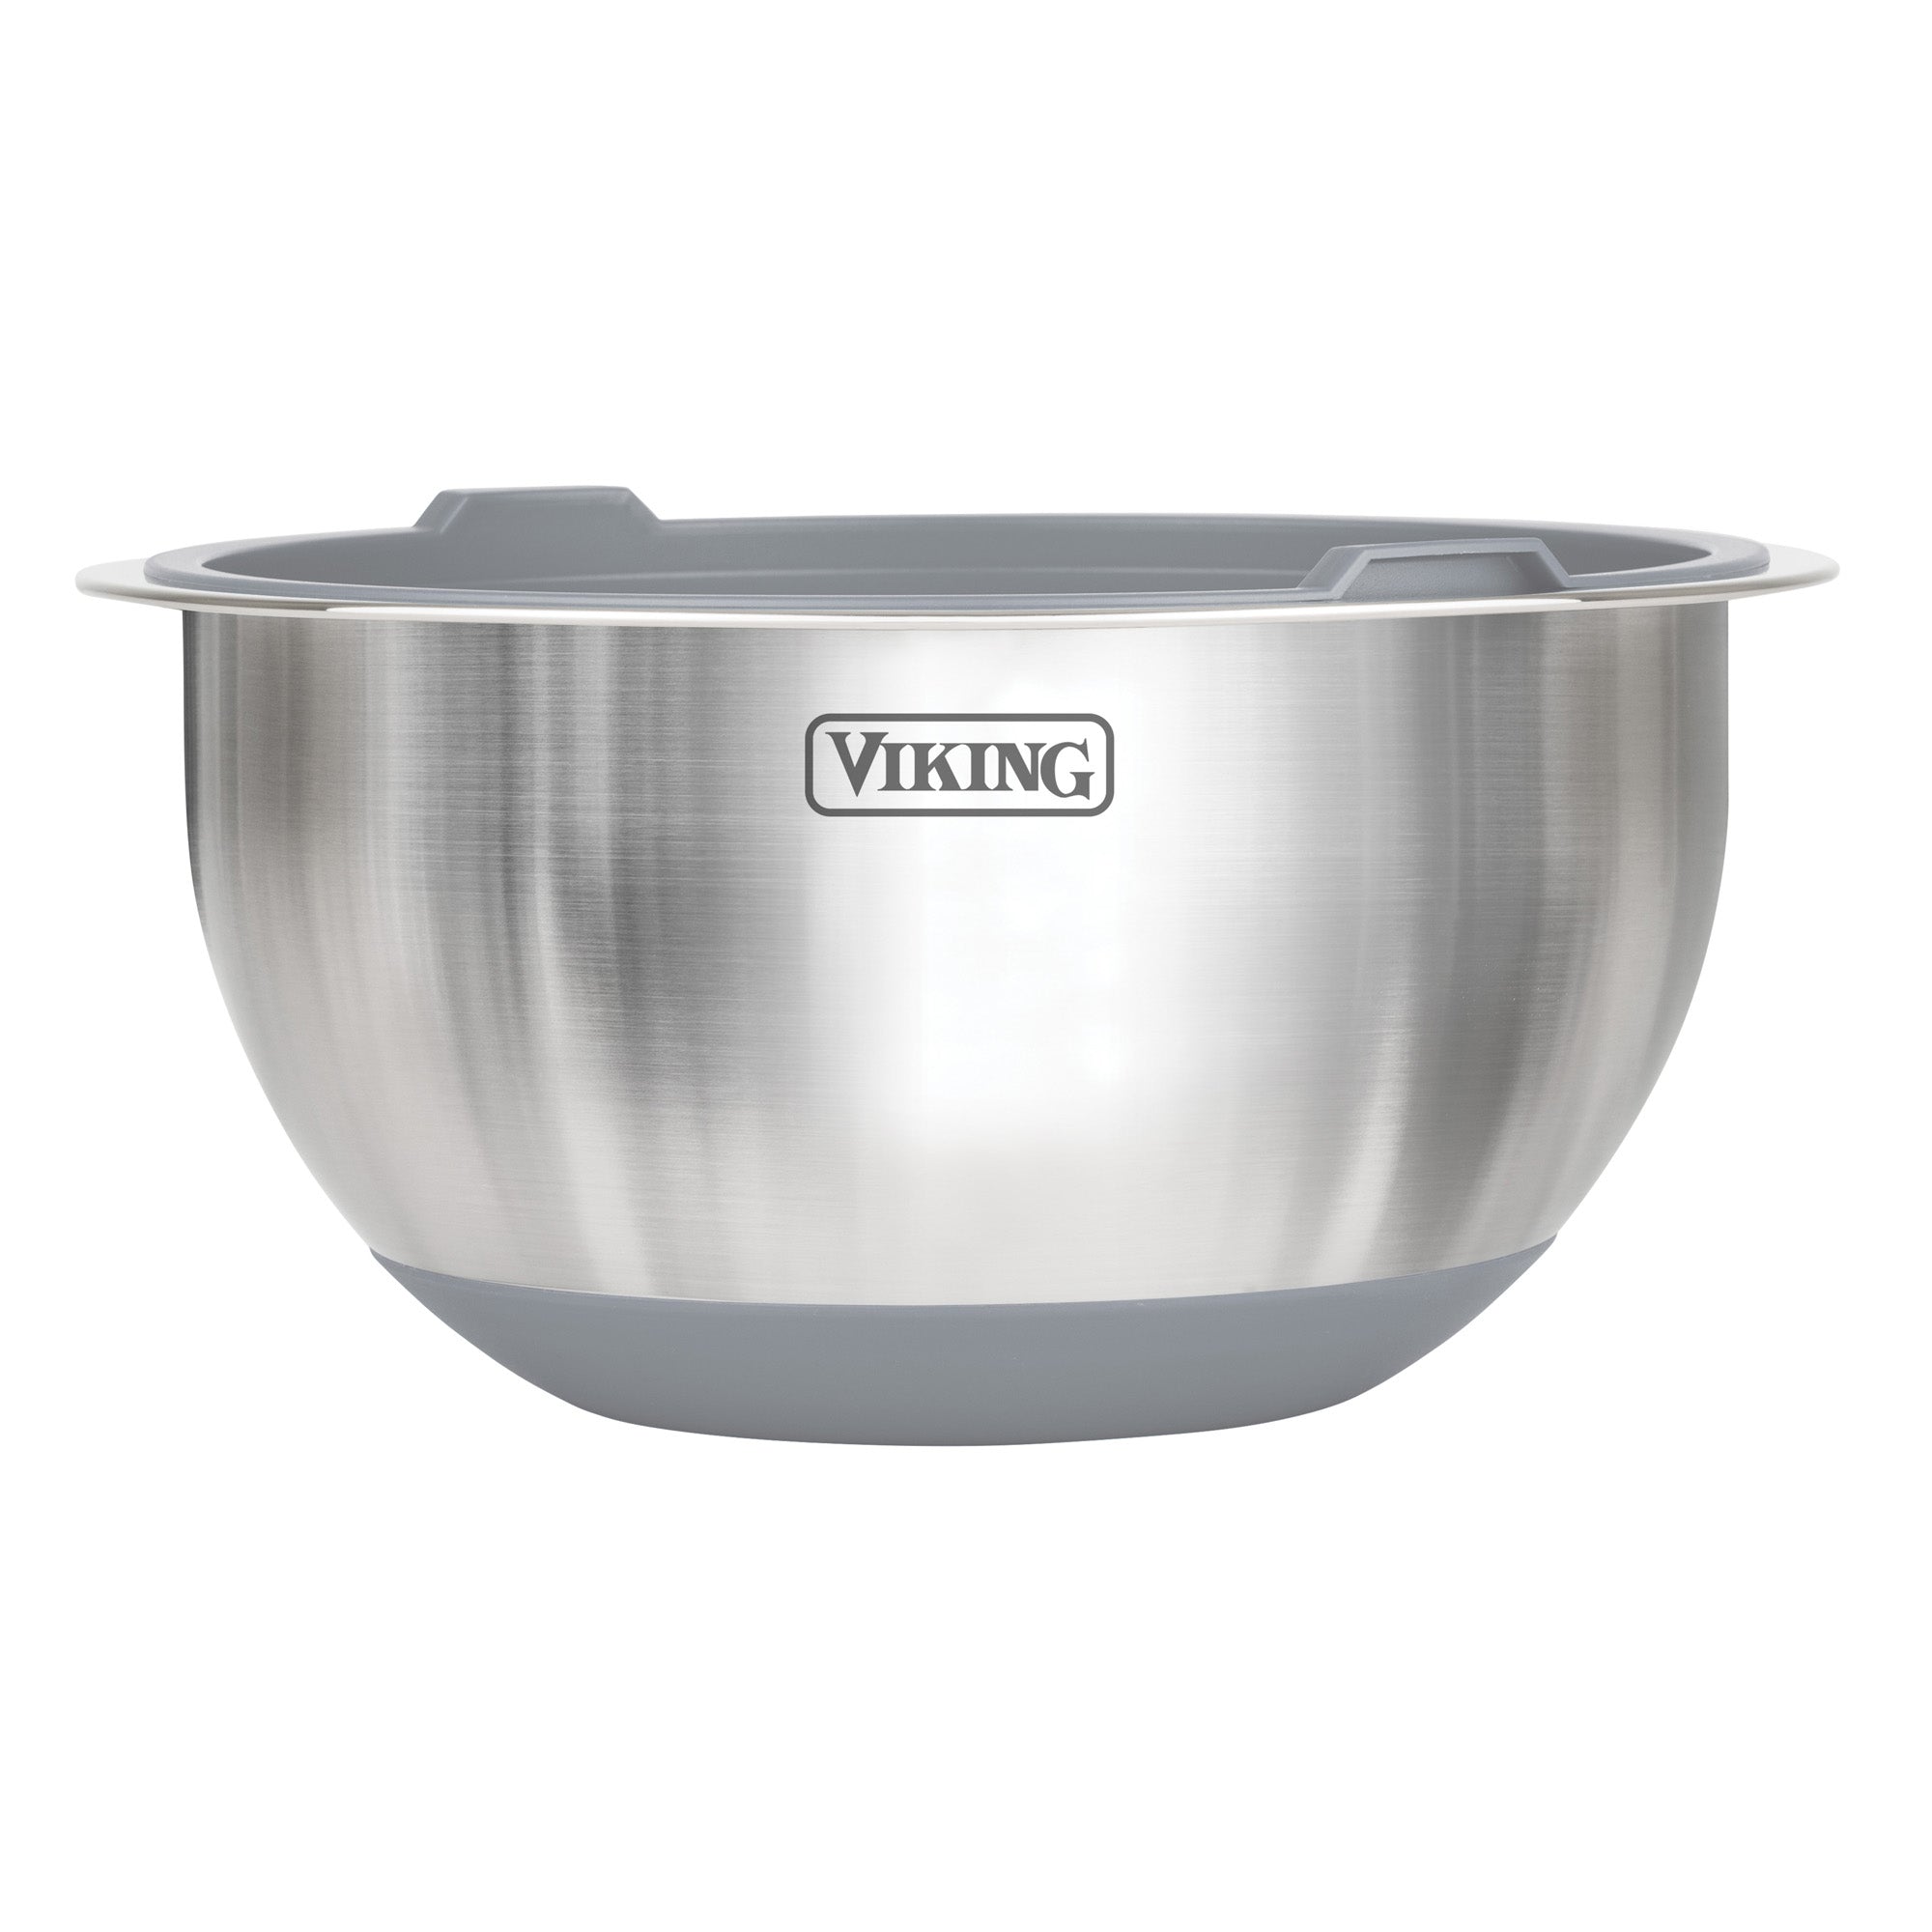 Viking 10-Piece Stainless Steel Mixing Bowl Set with Lids, Black